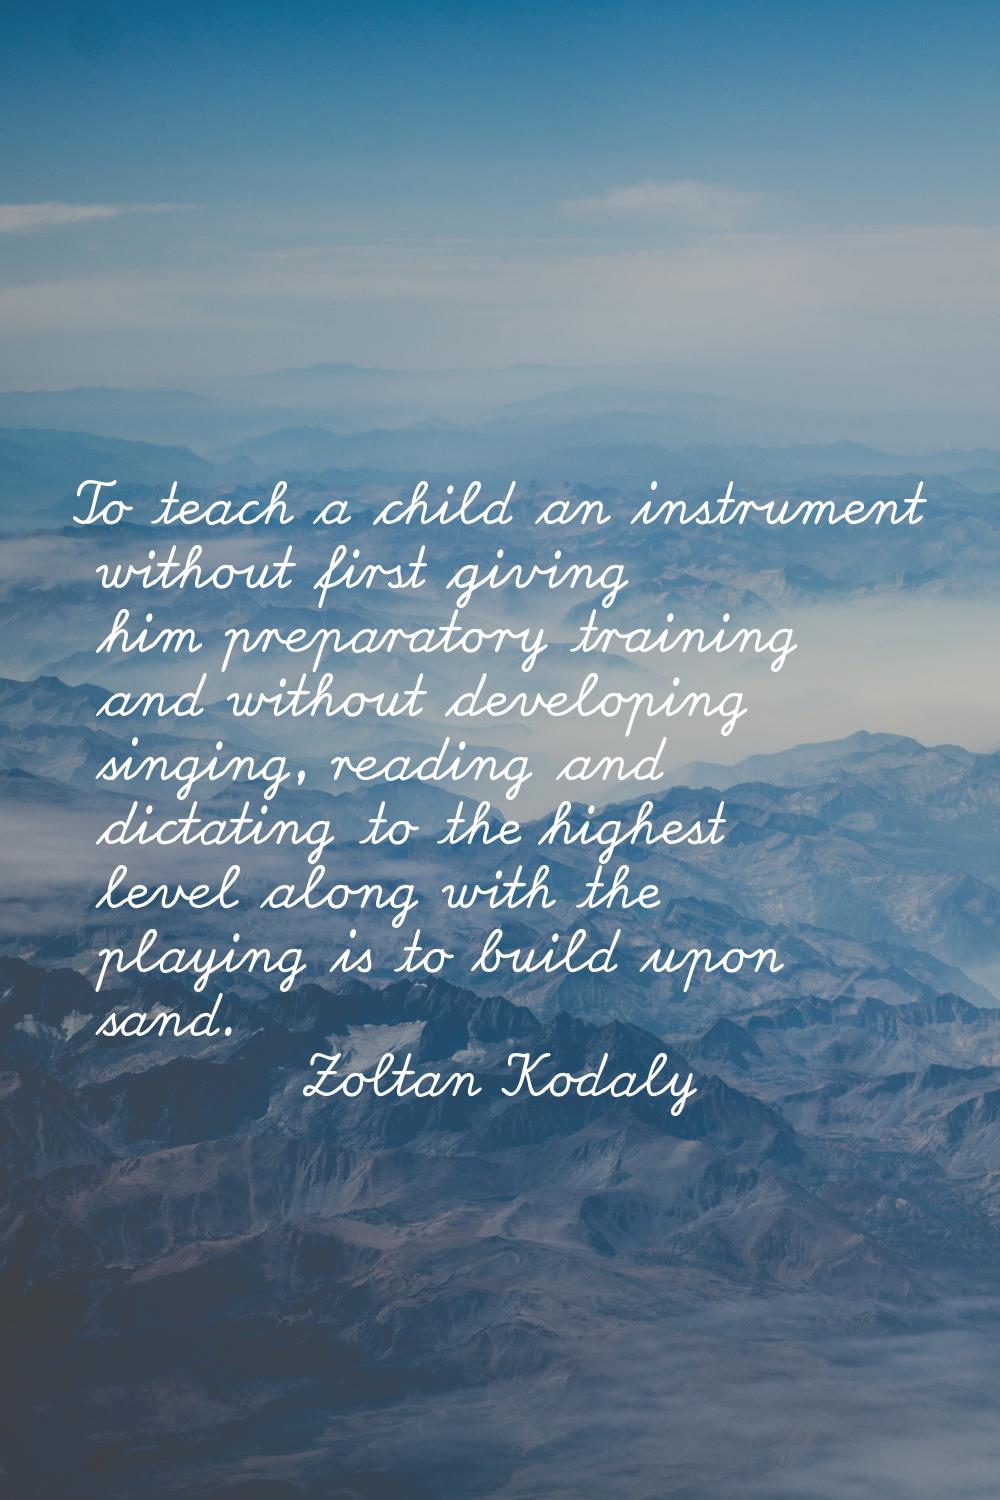 To teach a child an instrument without first giving him preparatory training and without developing